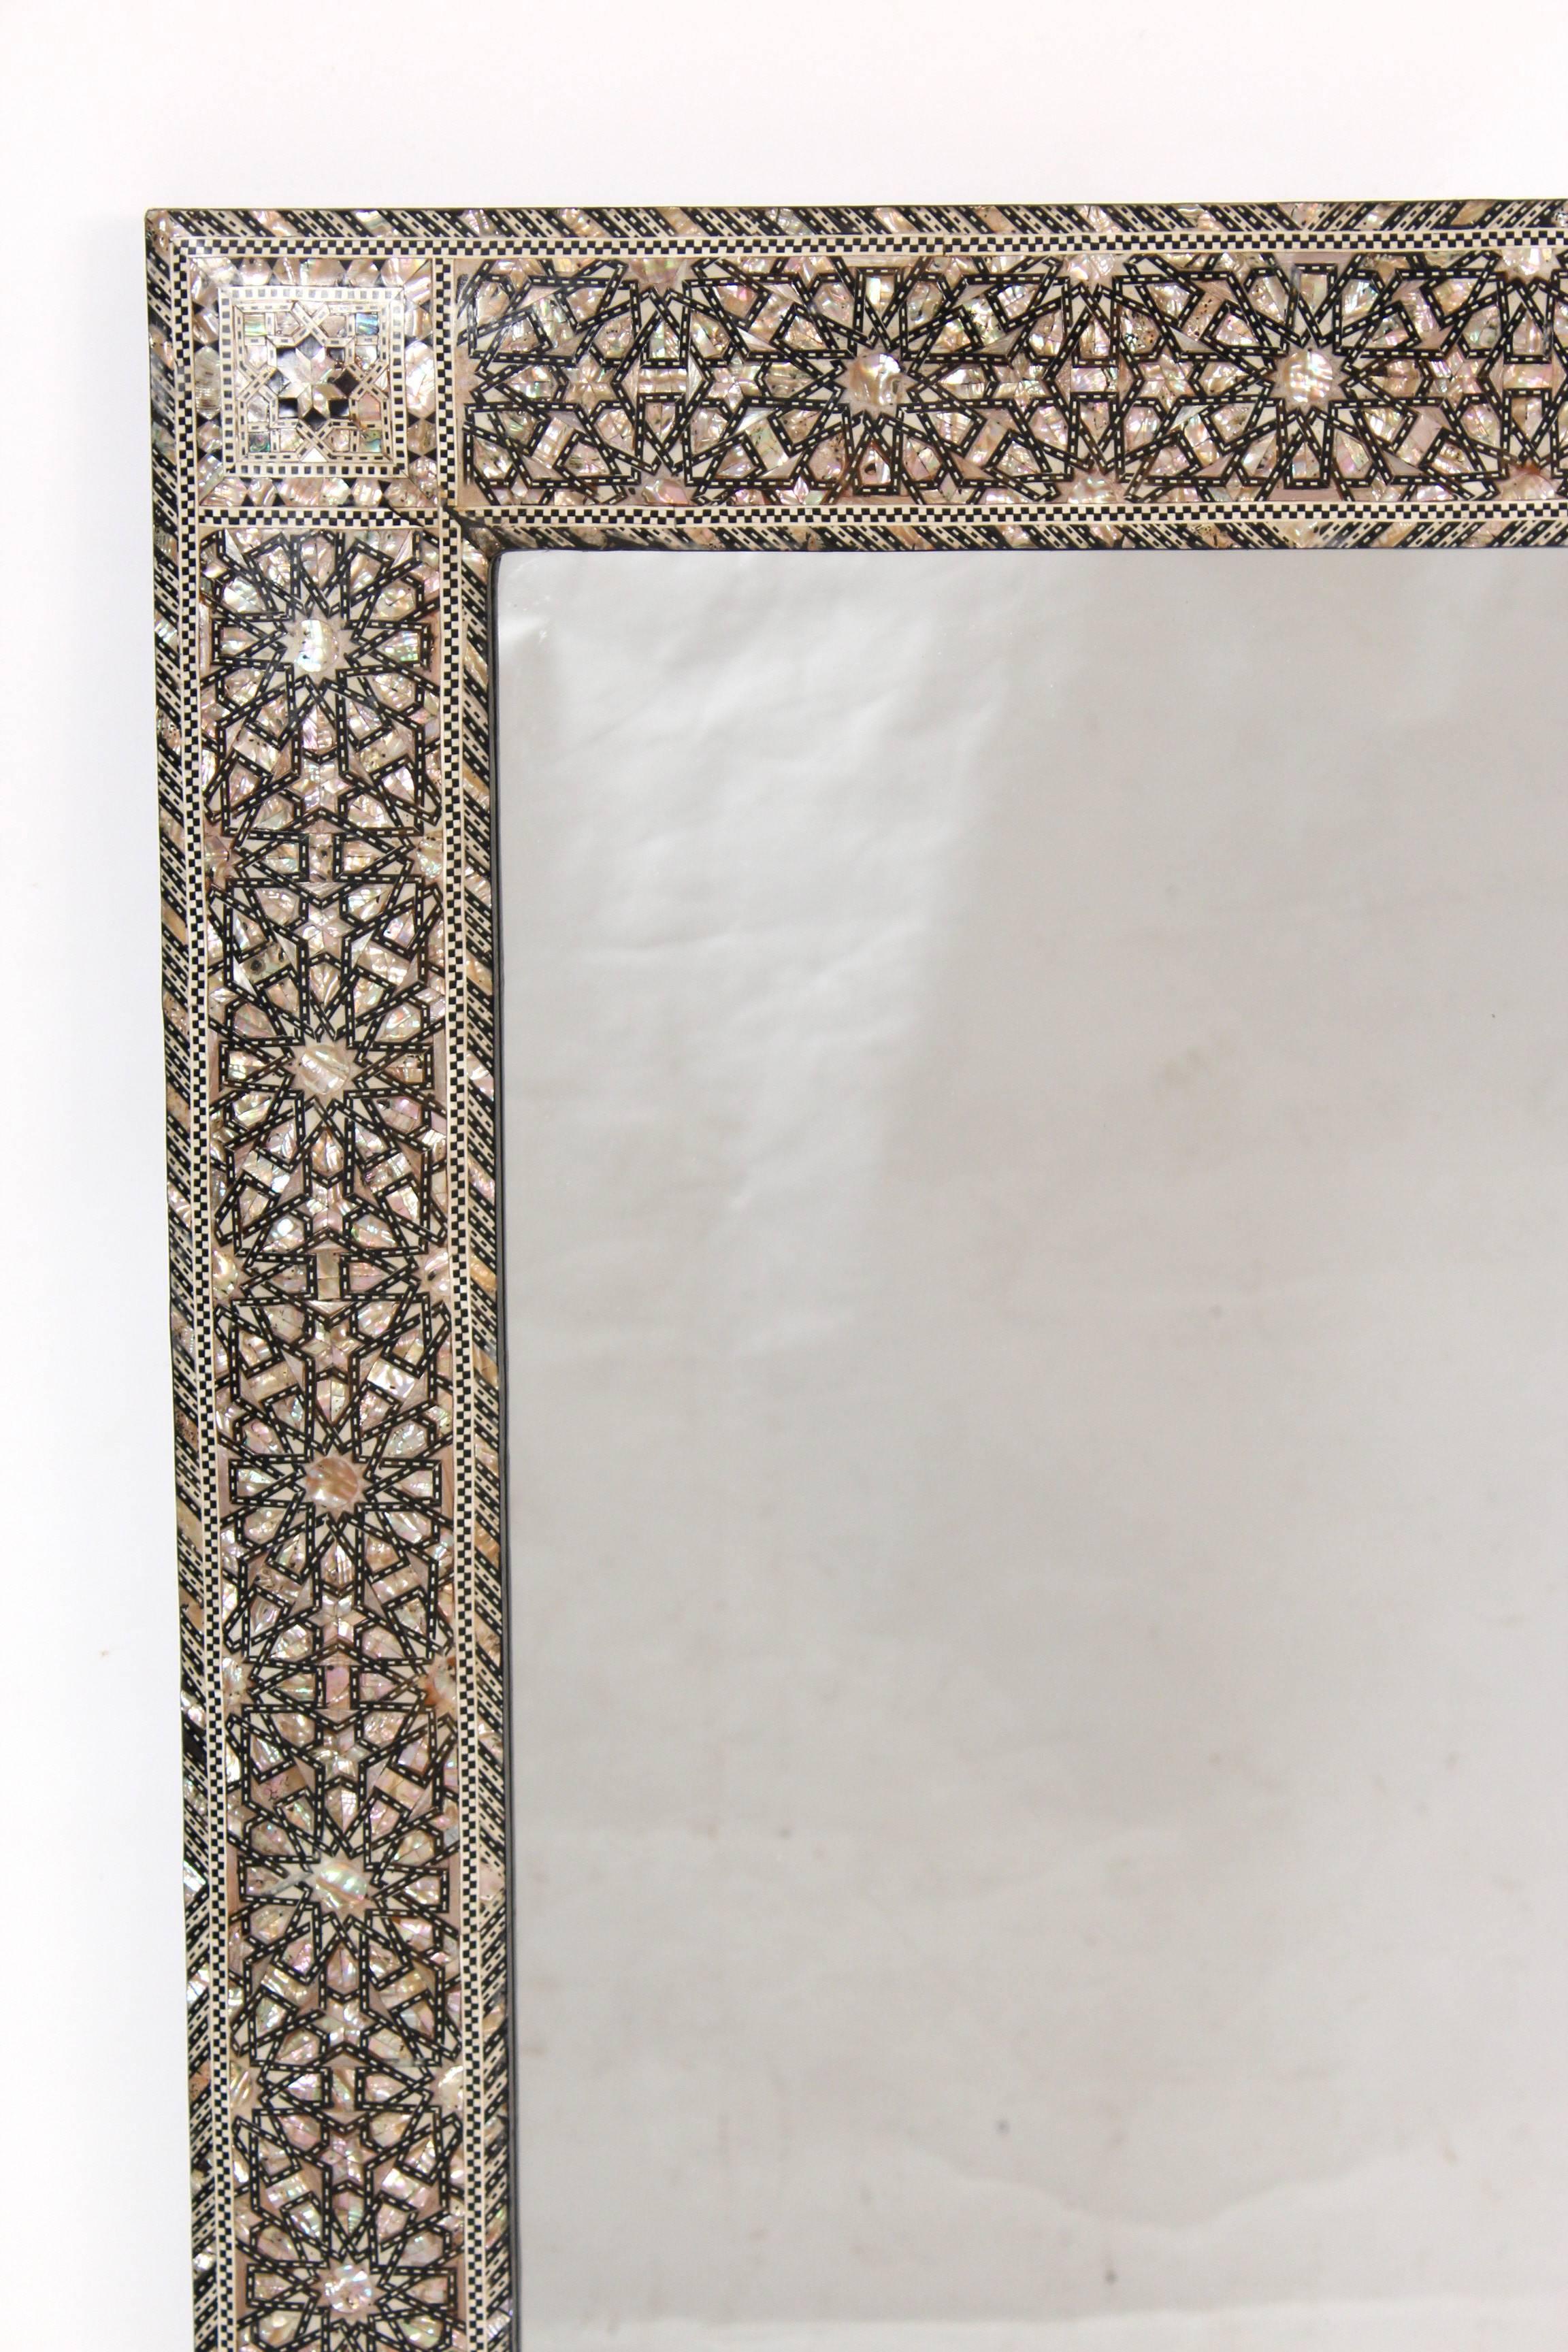 Middle Eastern mother-of-pearl and bone inlaid mirror, late 20th century.